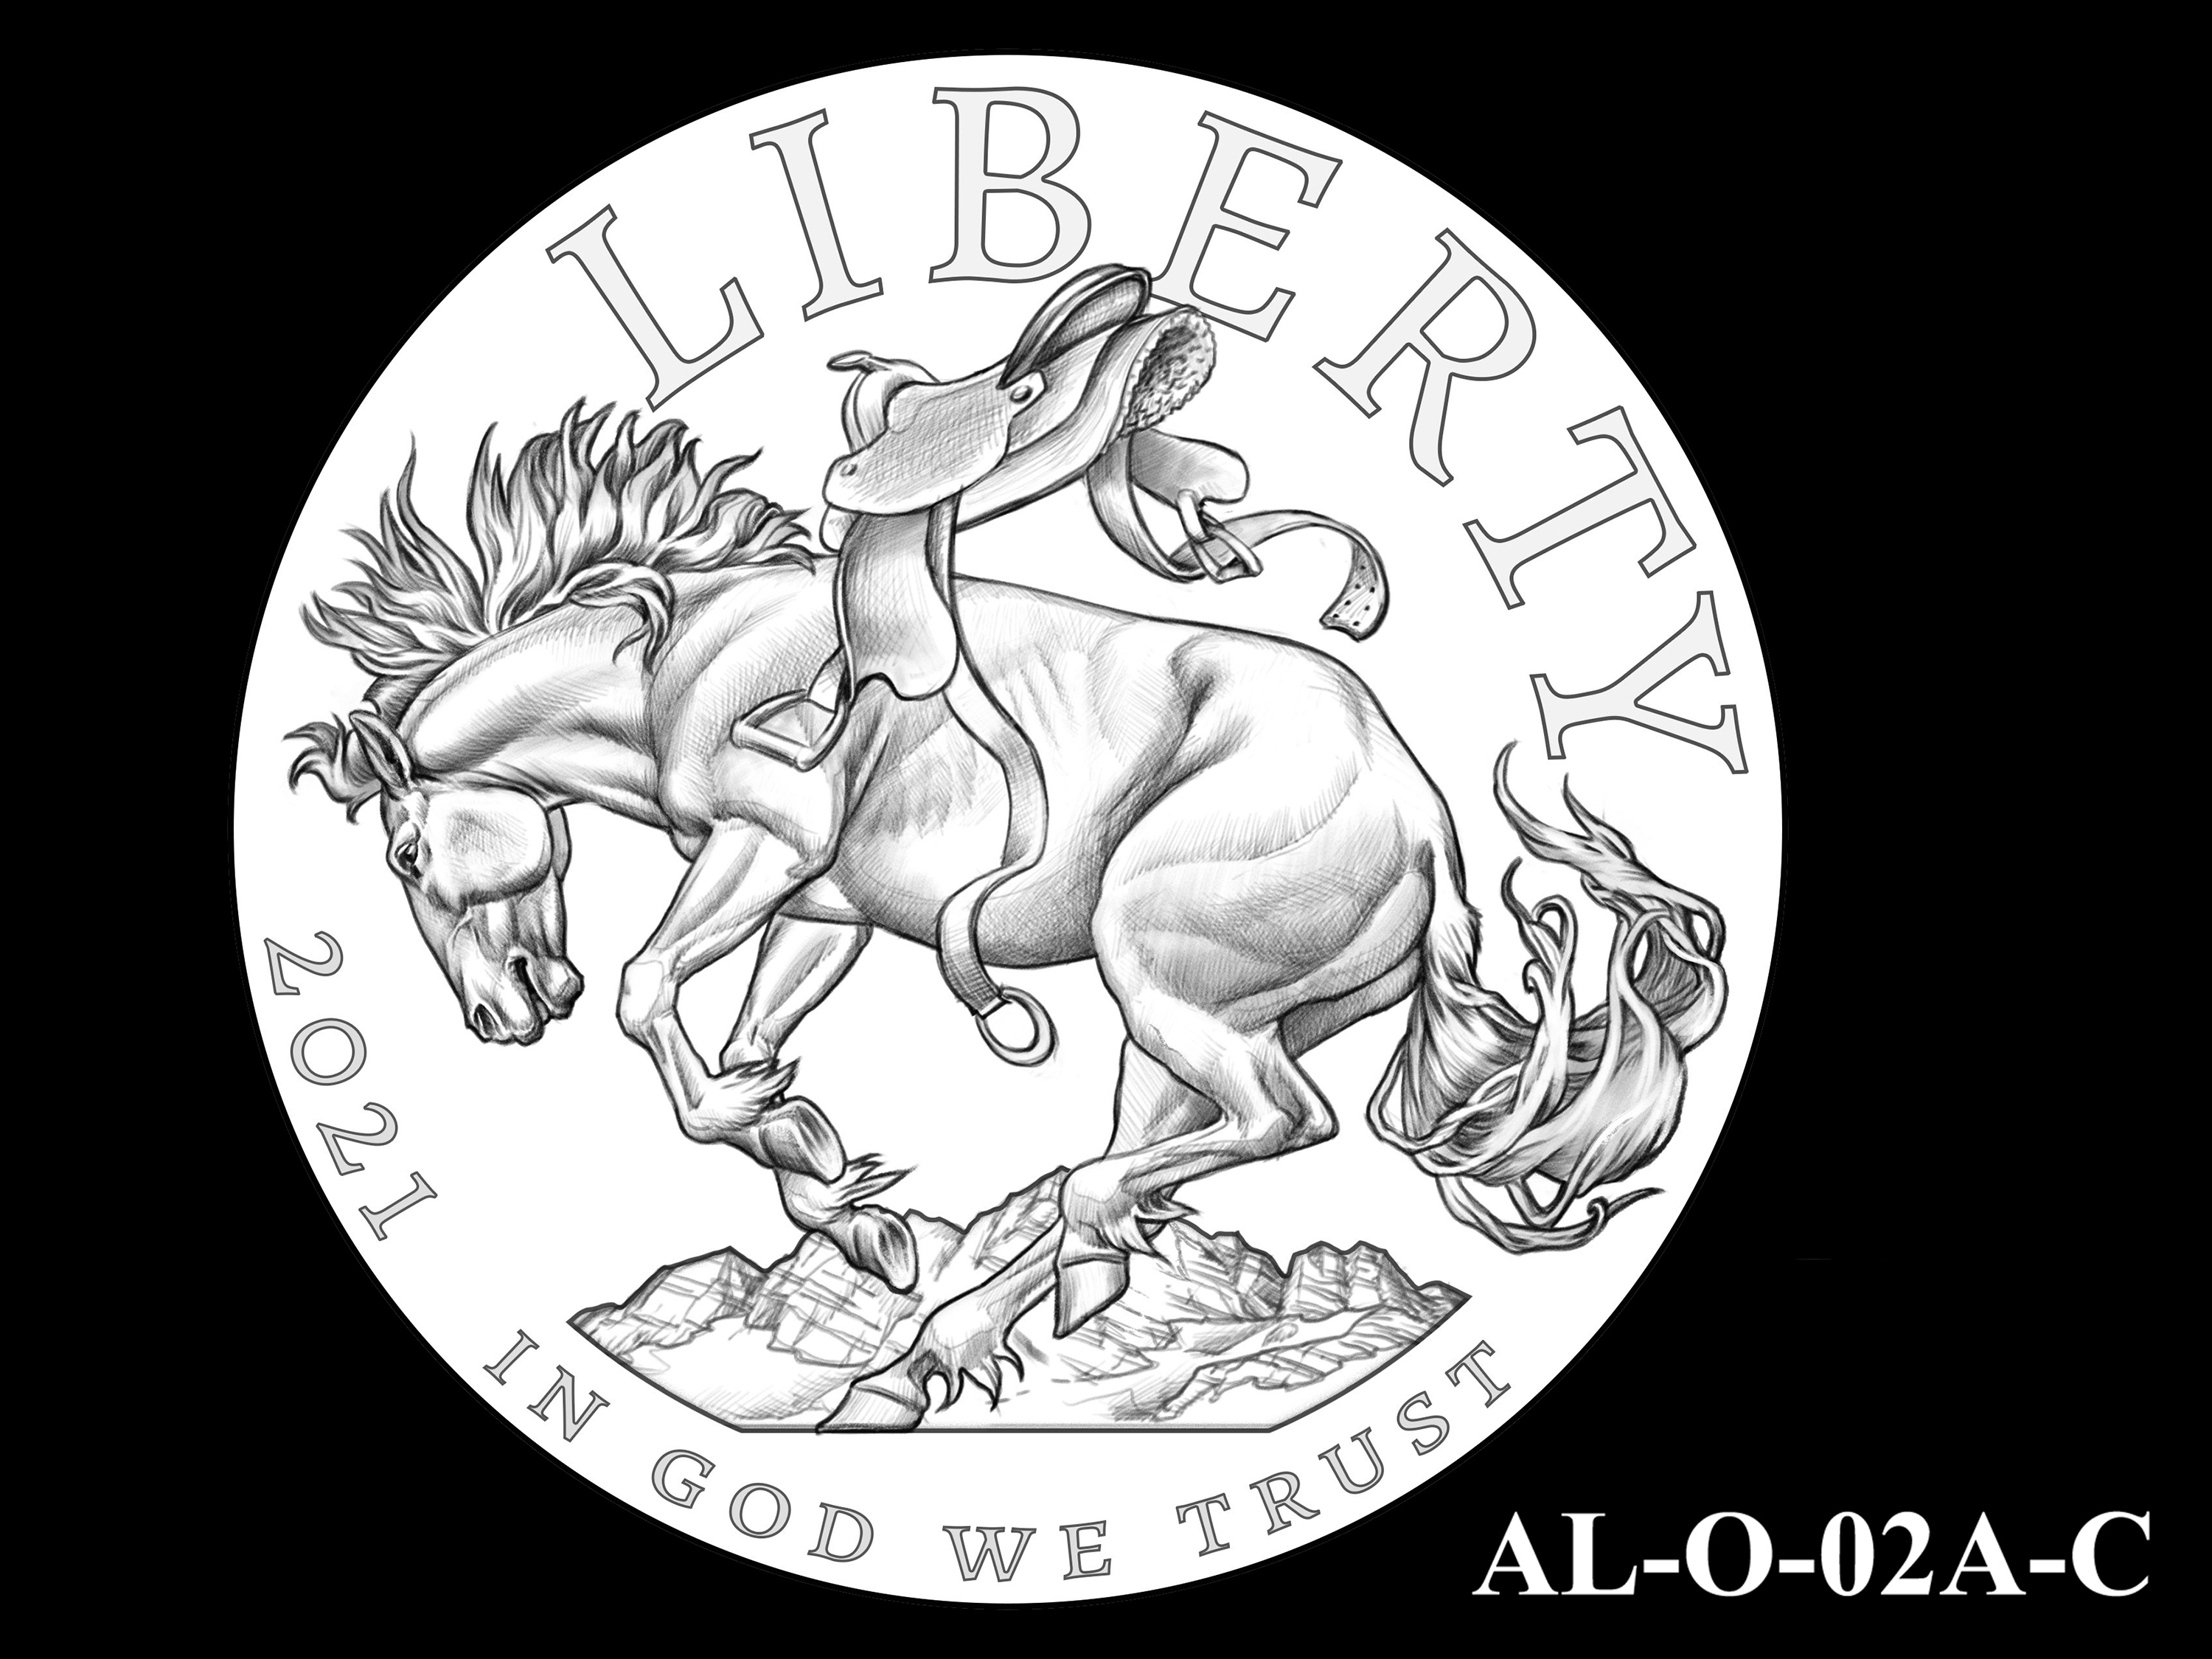 AL-O-02A-C -- 2021 American Liberty Gold Coin and Silver Medal Program - Obverse